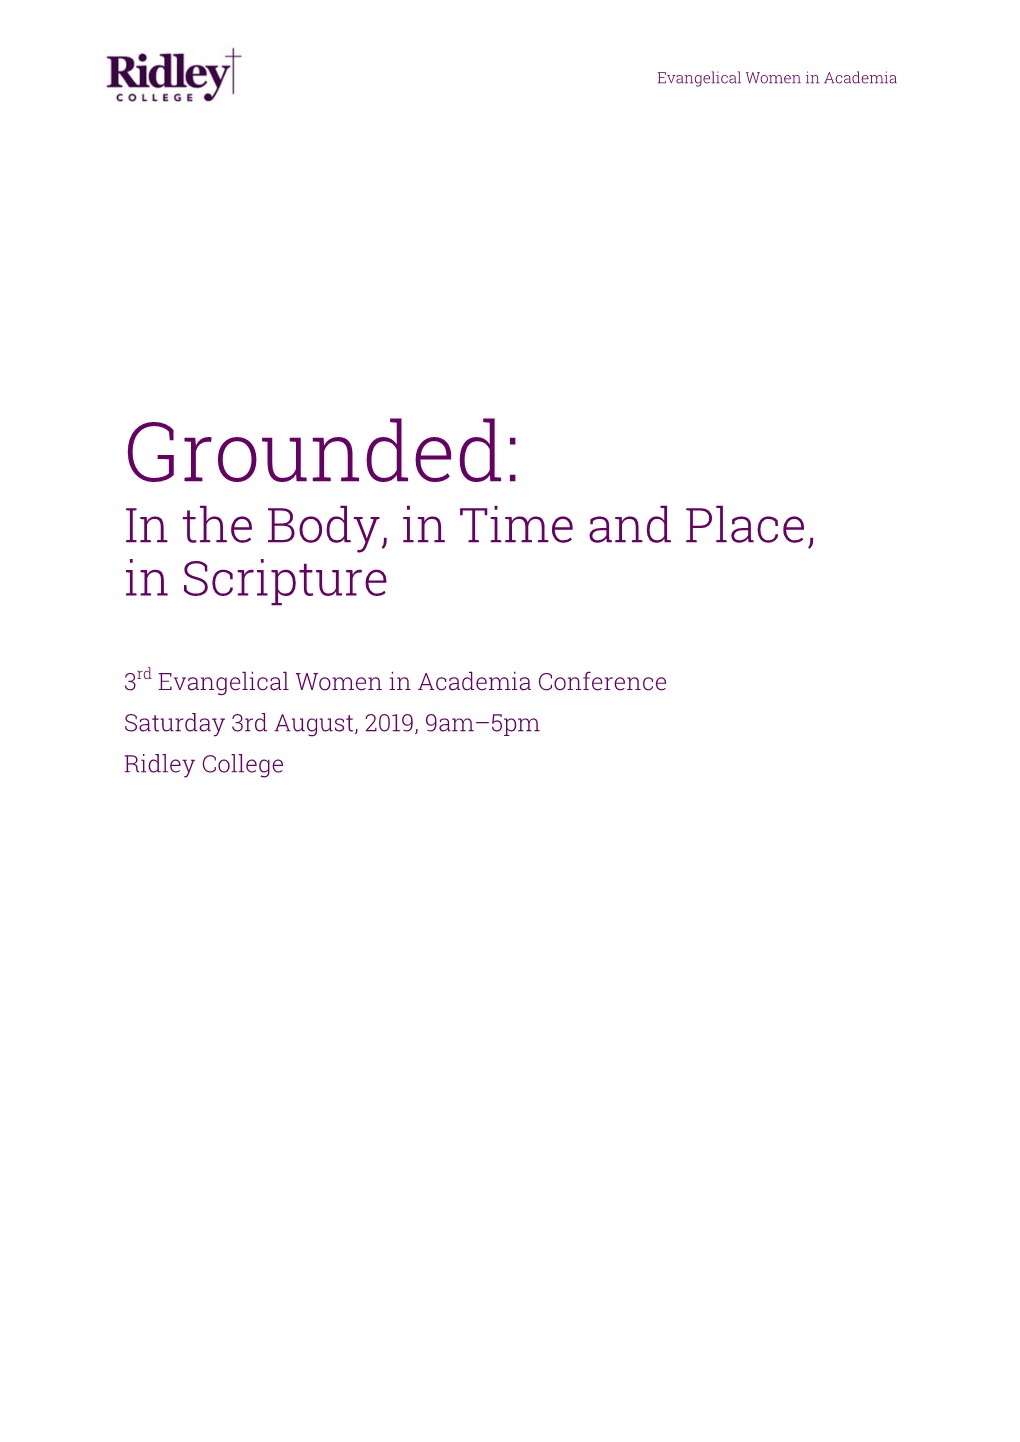 Grounded: in the Body, in Time and Place, in Scripture